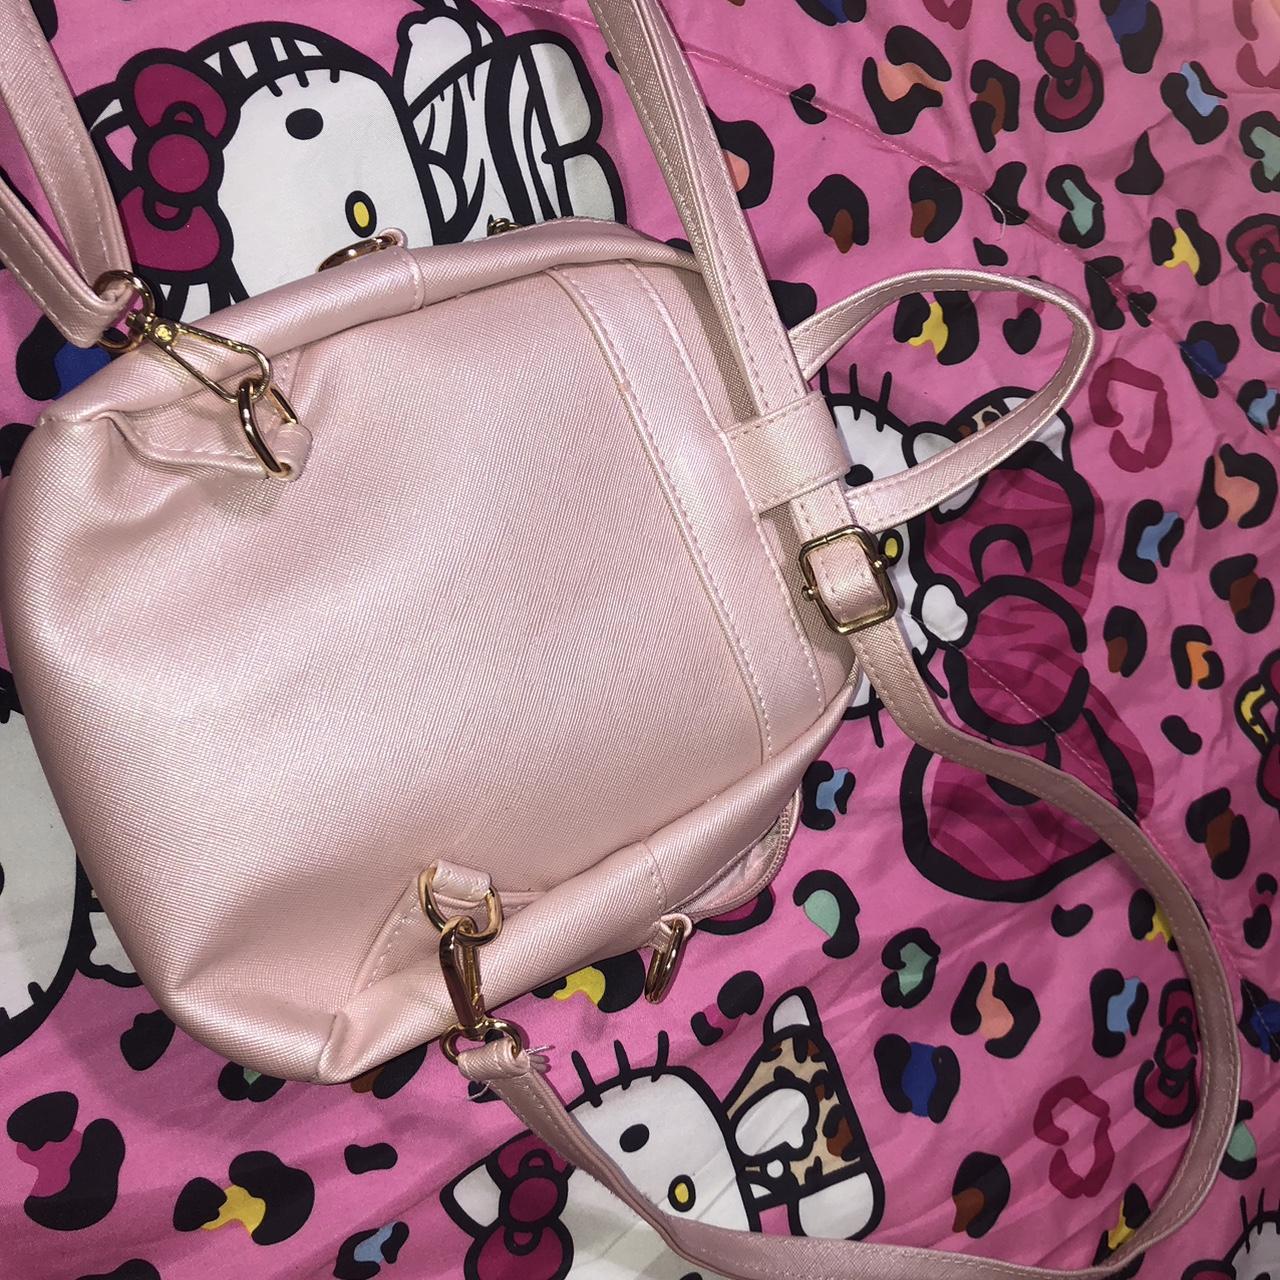 Sanrio Women's Pink and White Bag (4)